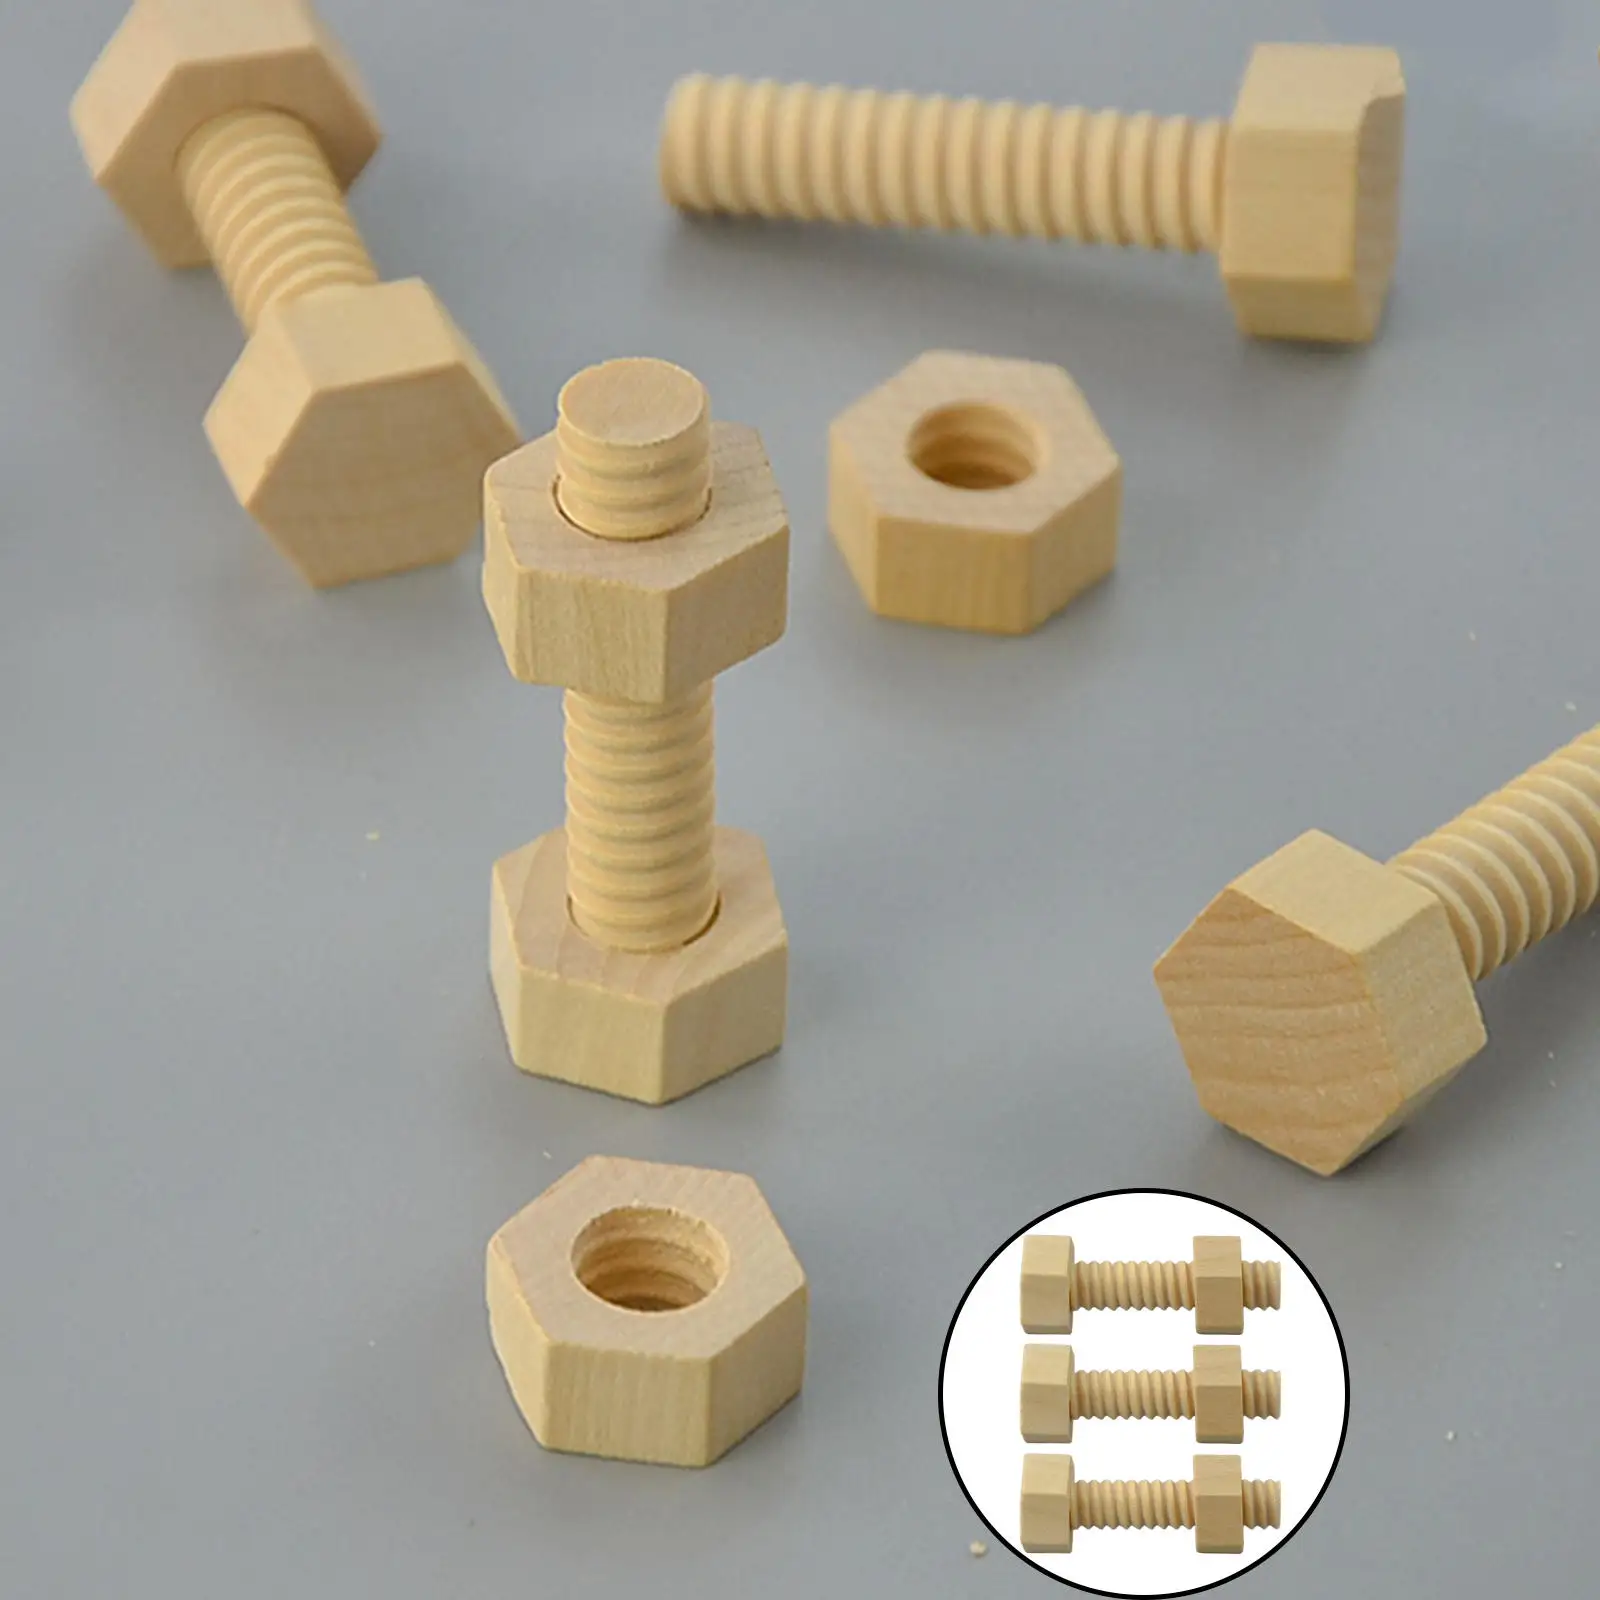 Screw Nut Assembling Toy Montessori Hands-on Skills Puzzle for Boys Girls